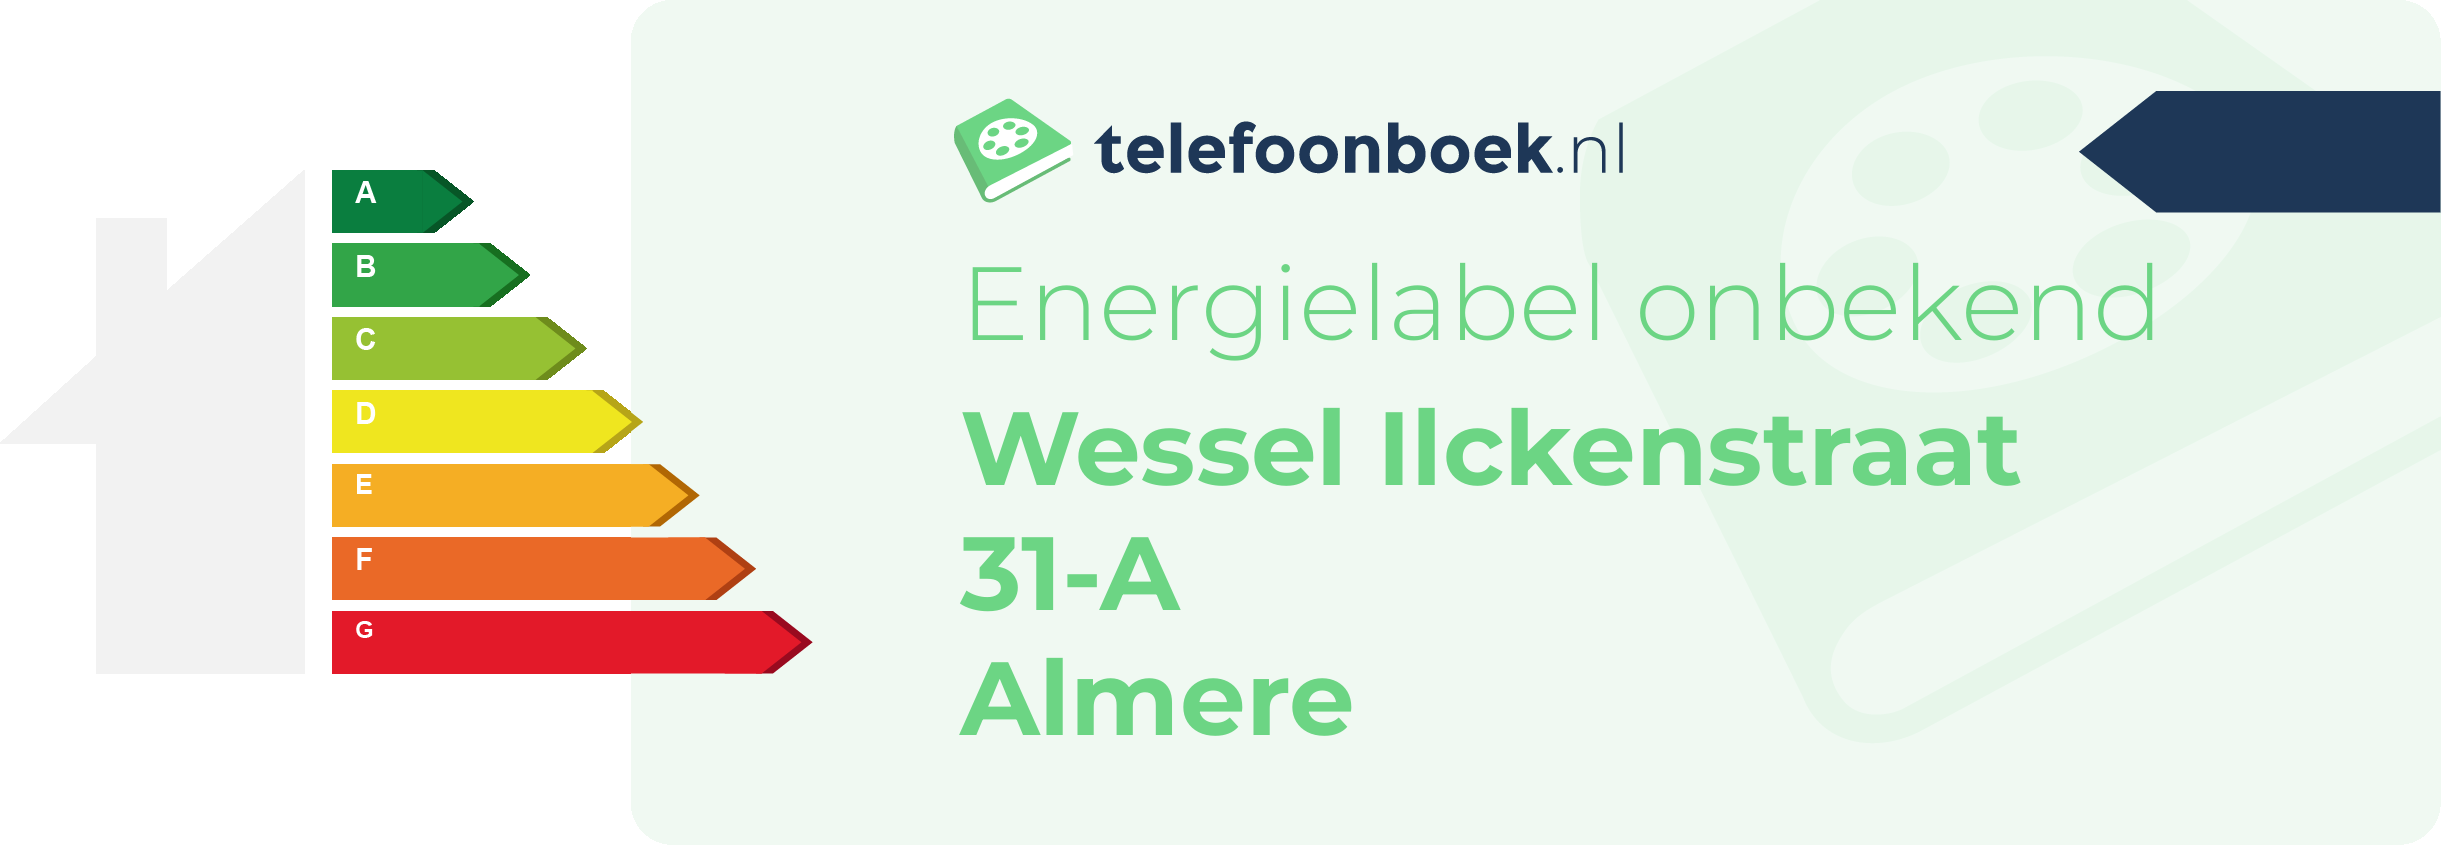 Energielabel Wessel Ilckenstraat 31-A Almere